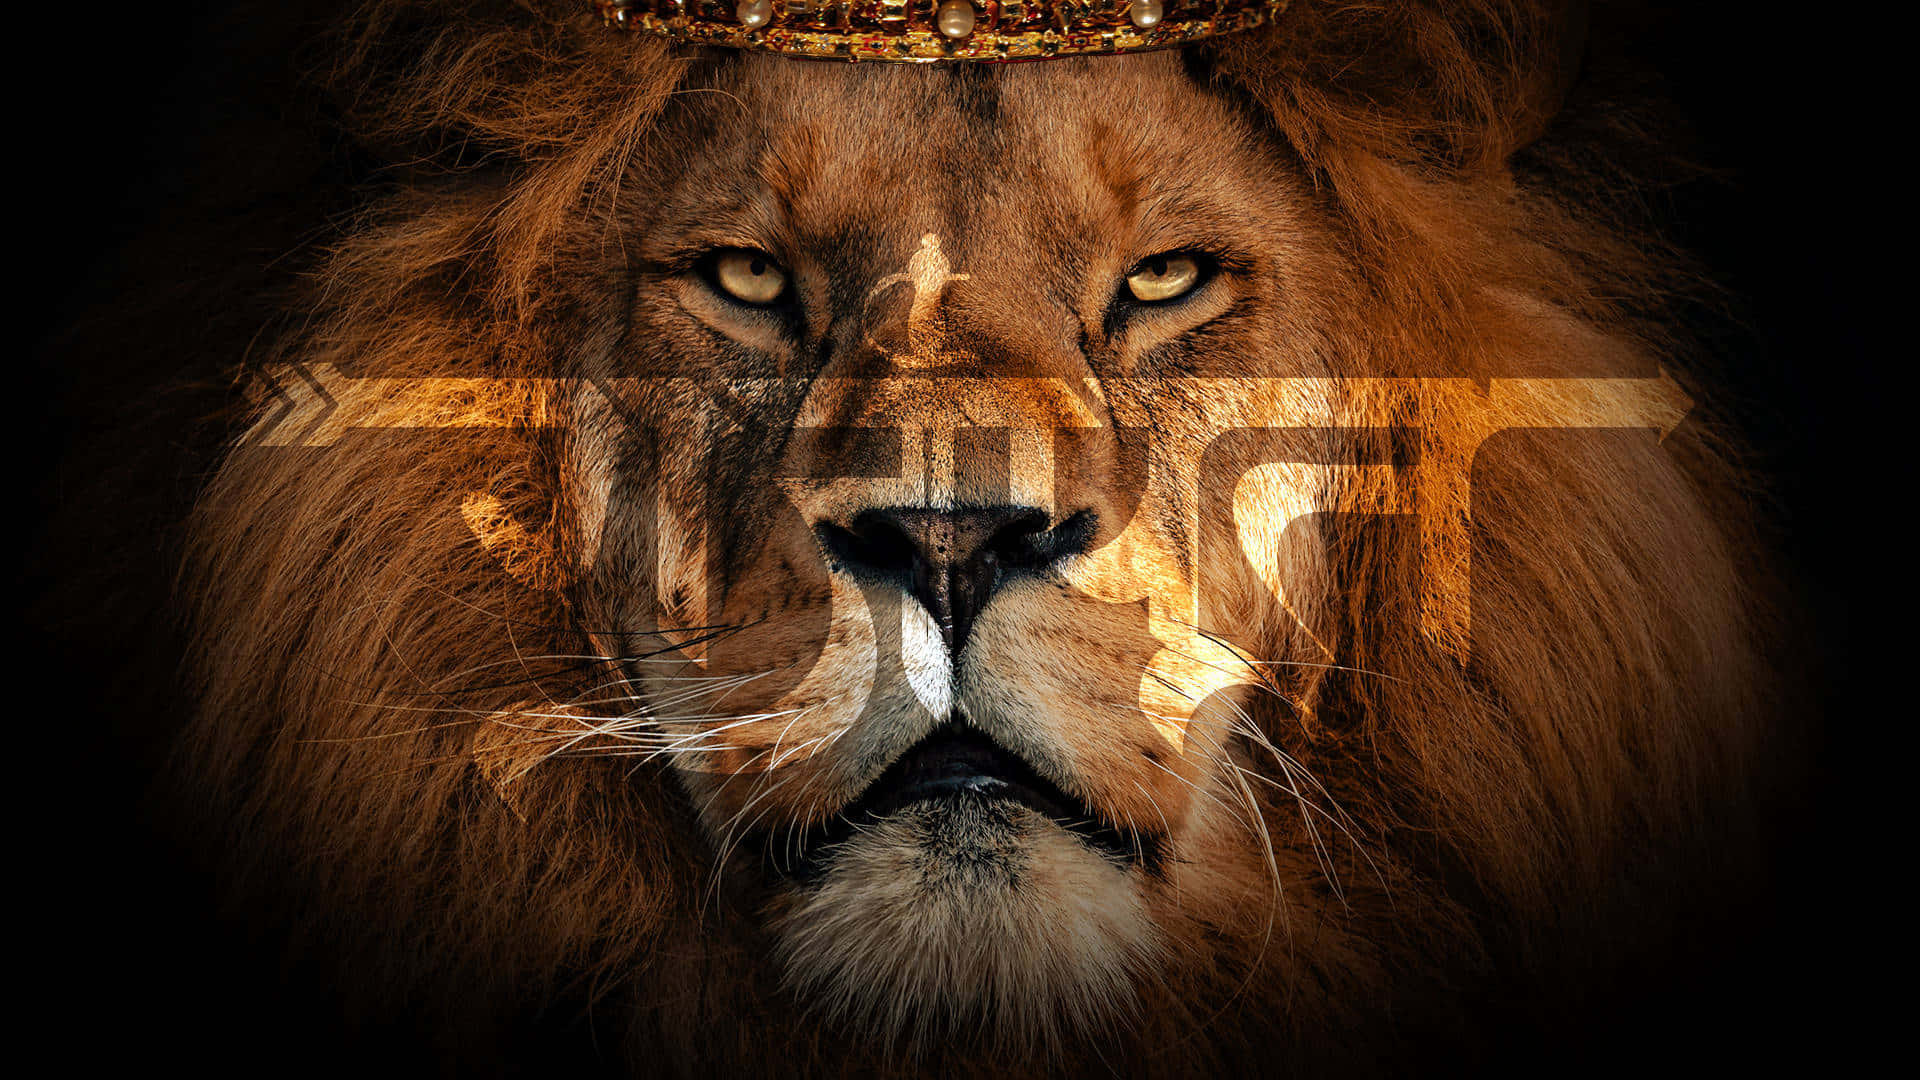 The roaring Lion of Judah symbolizes strength and courage.